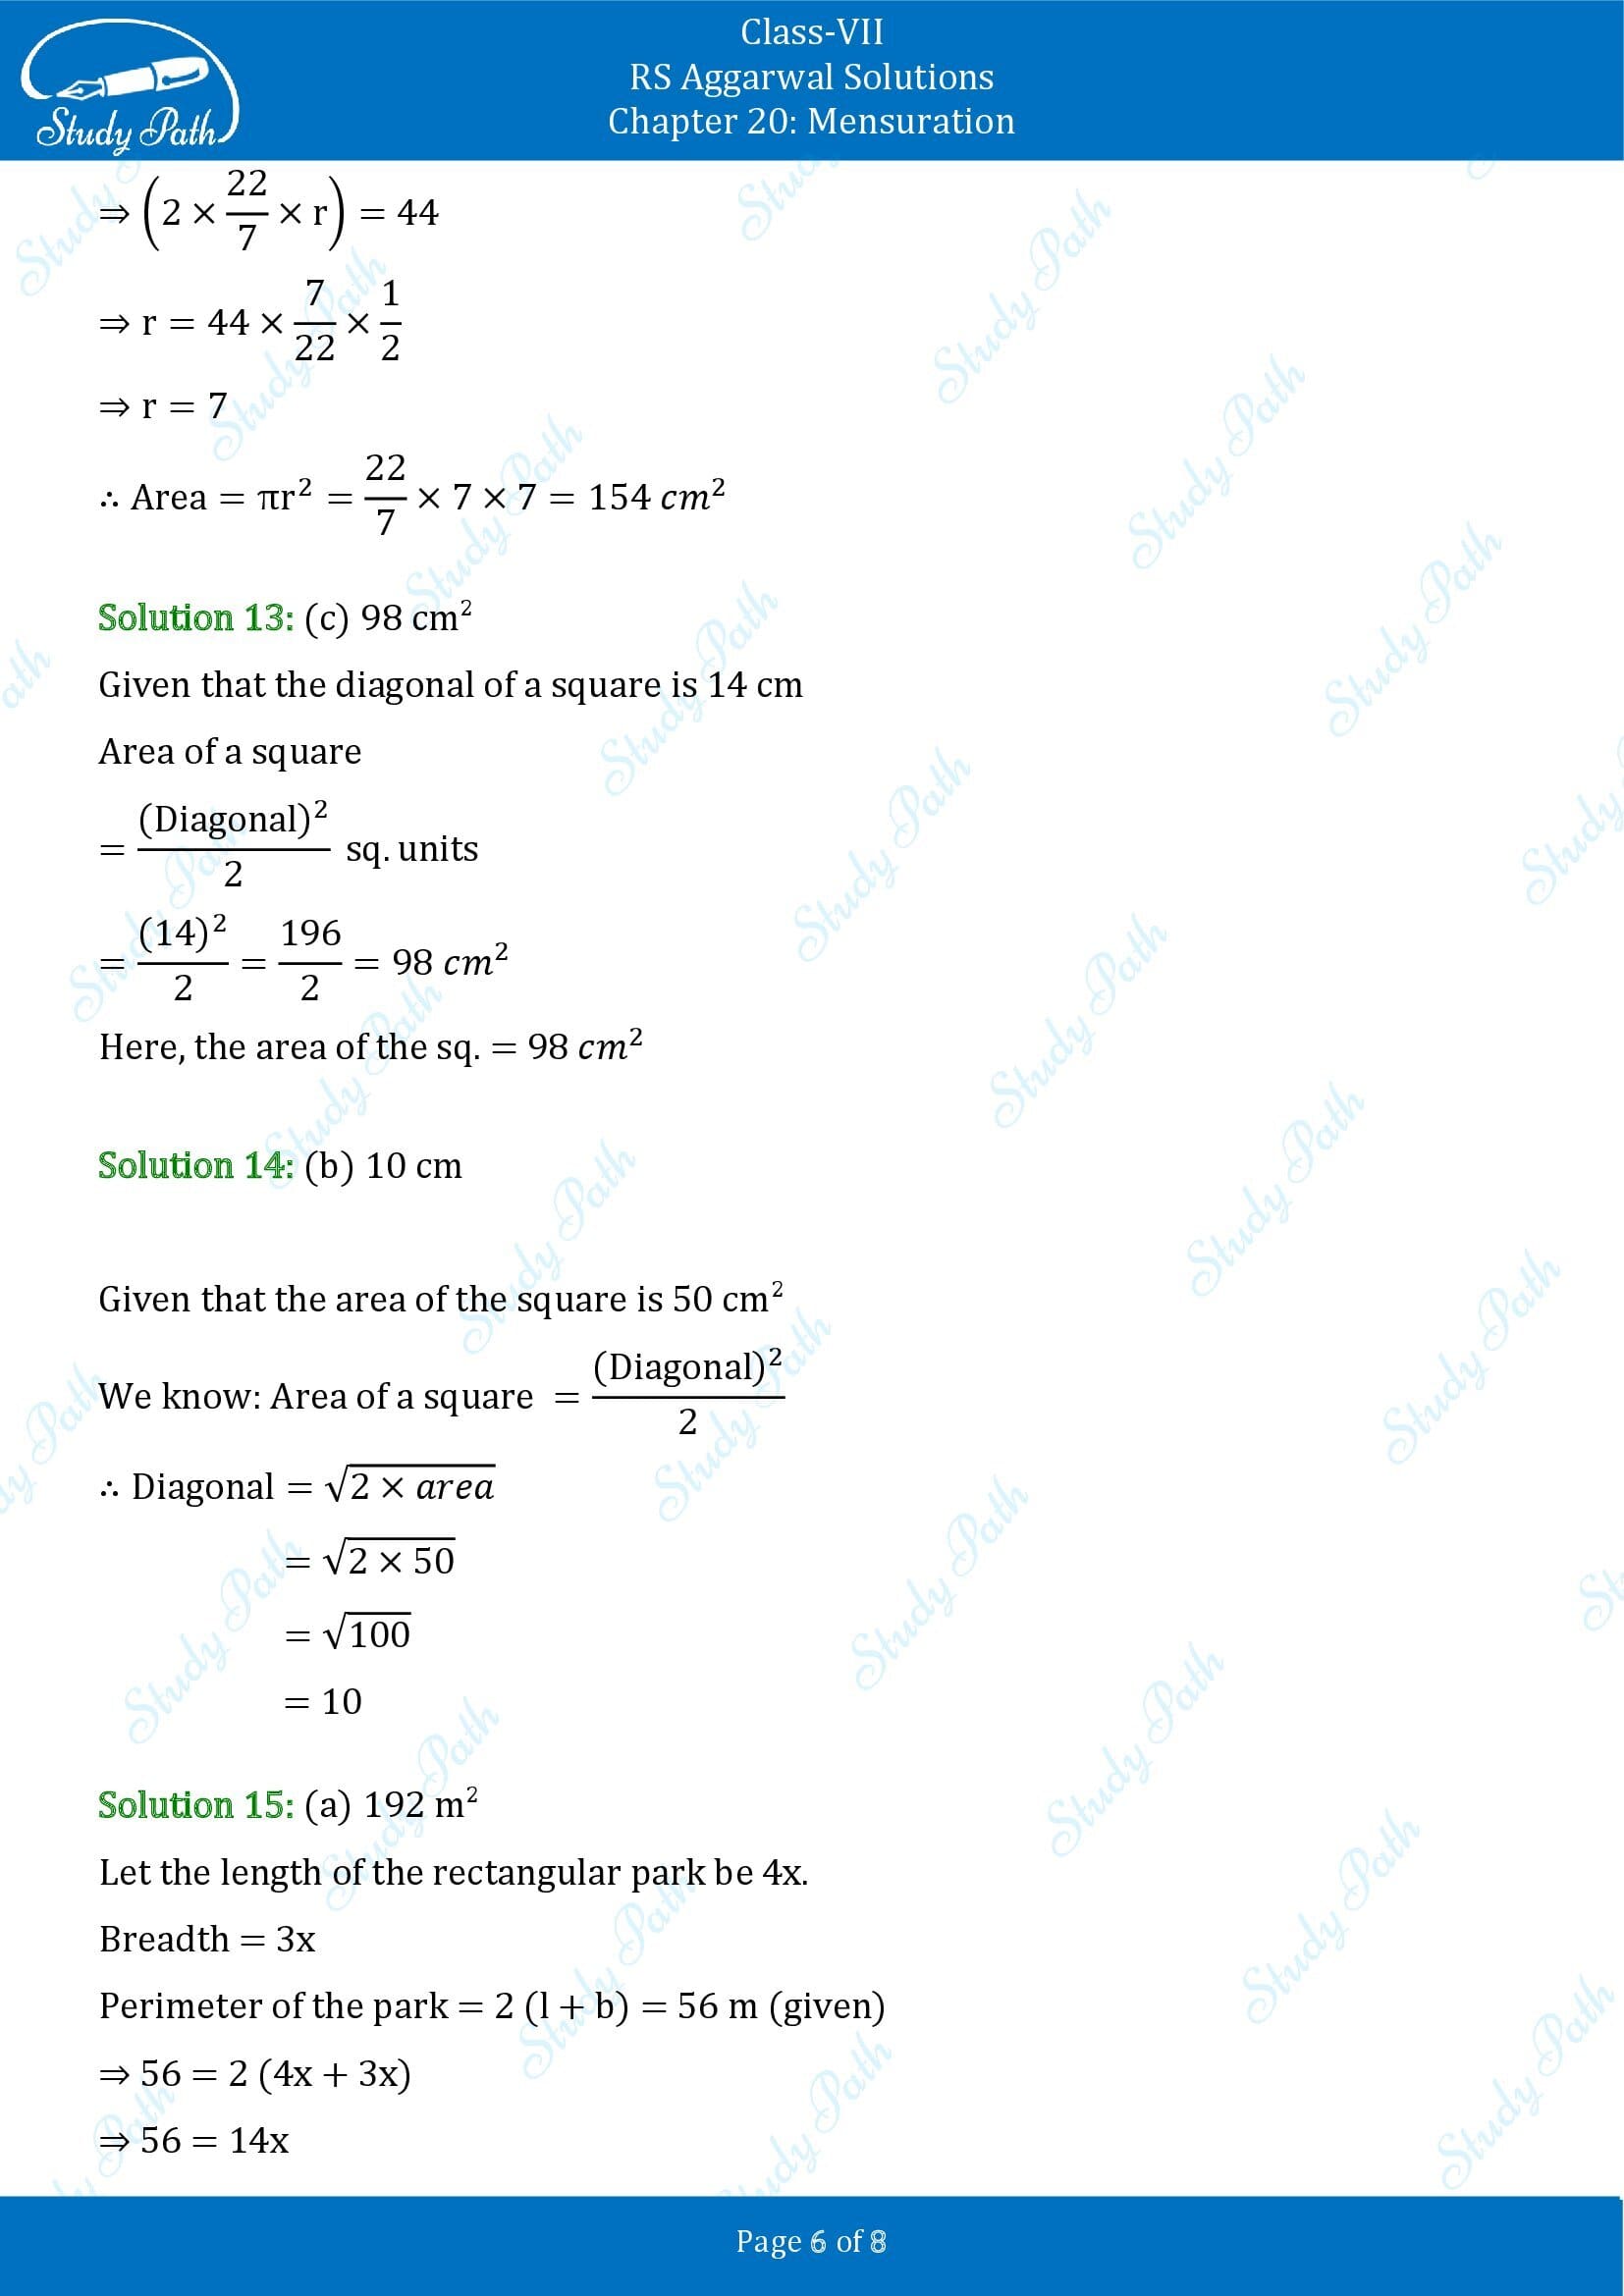 RS Aggarwal Solutions Class 7 Chapter 20 Mensuration Test Paper 20 0006